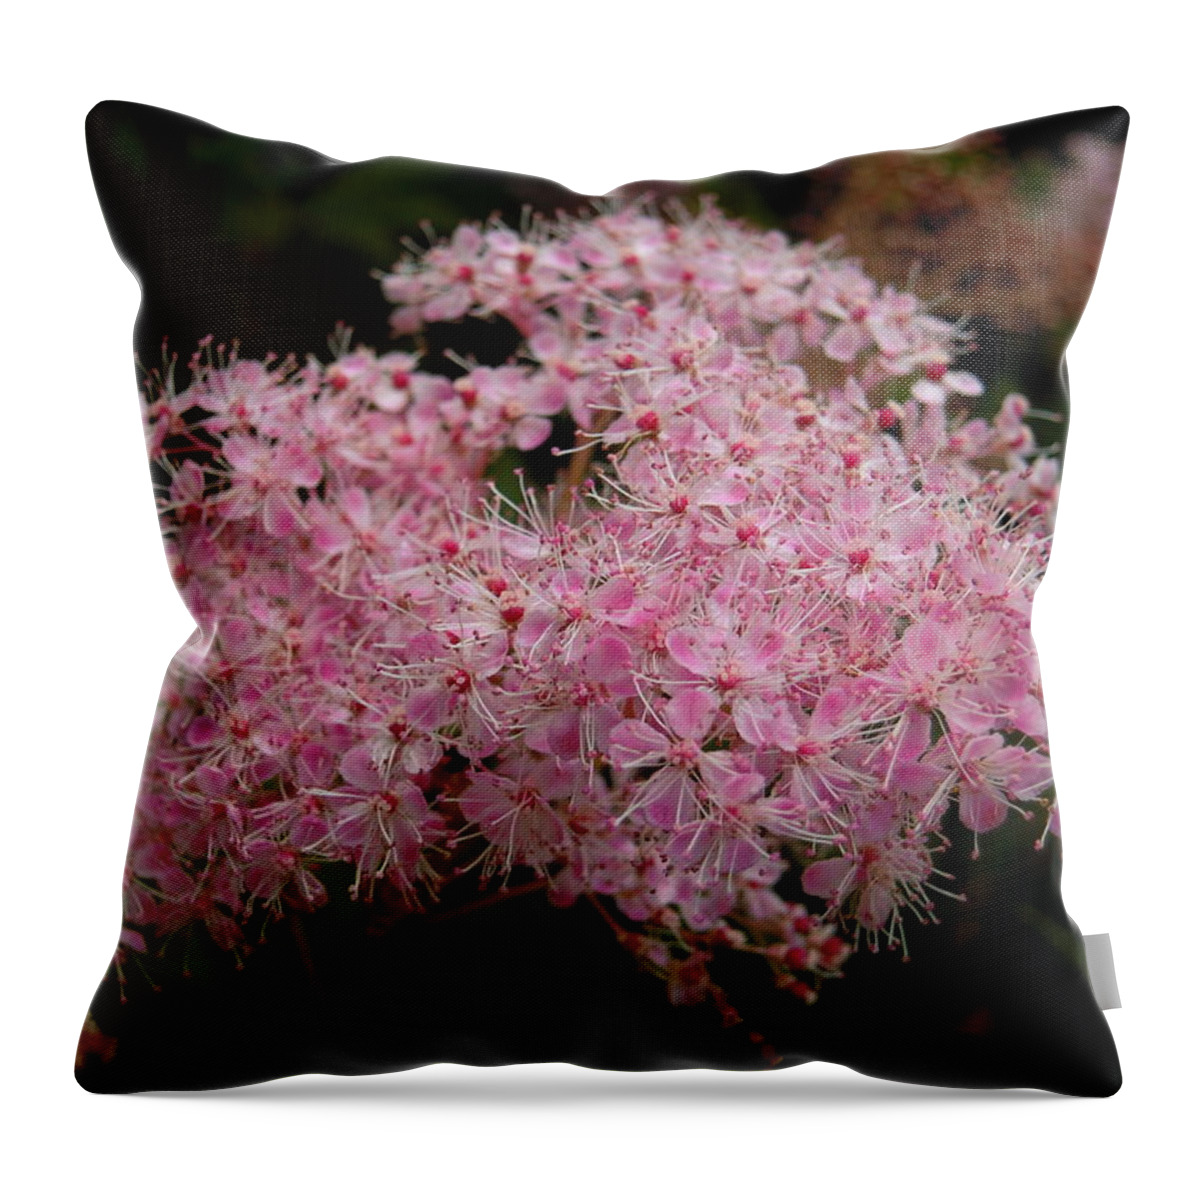 Pink Throw Pillow featuring the photograph Pink Flower #2 by Svetlana Sewell